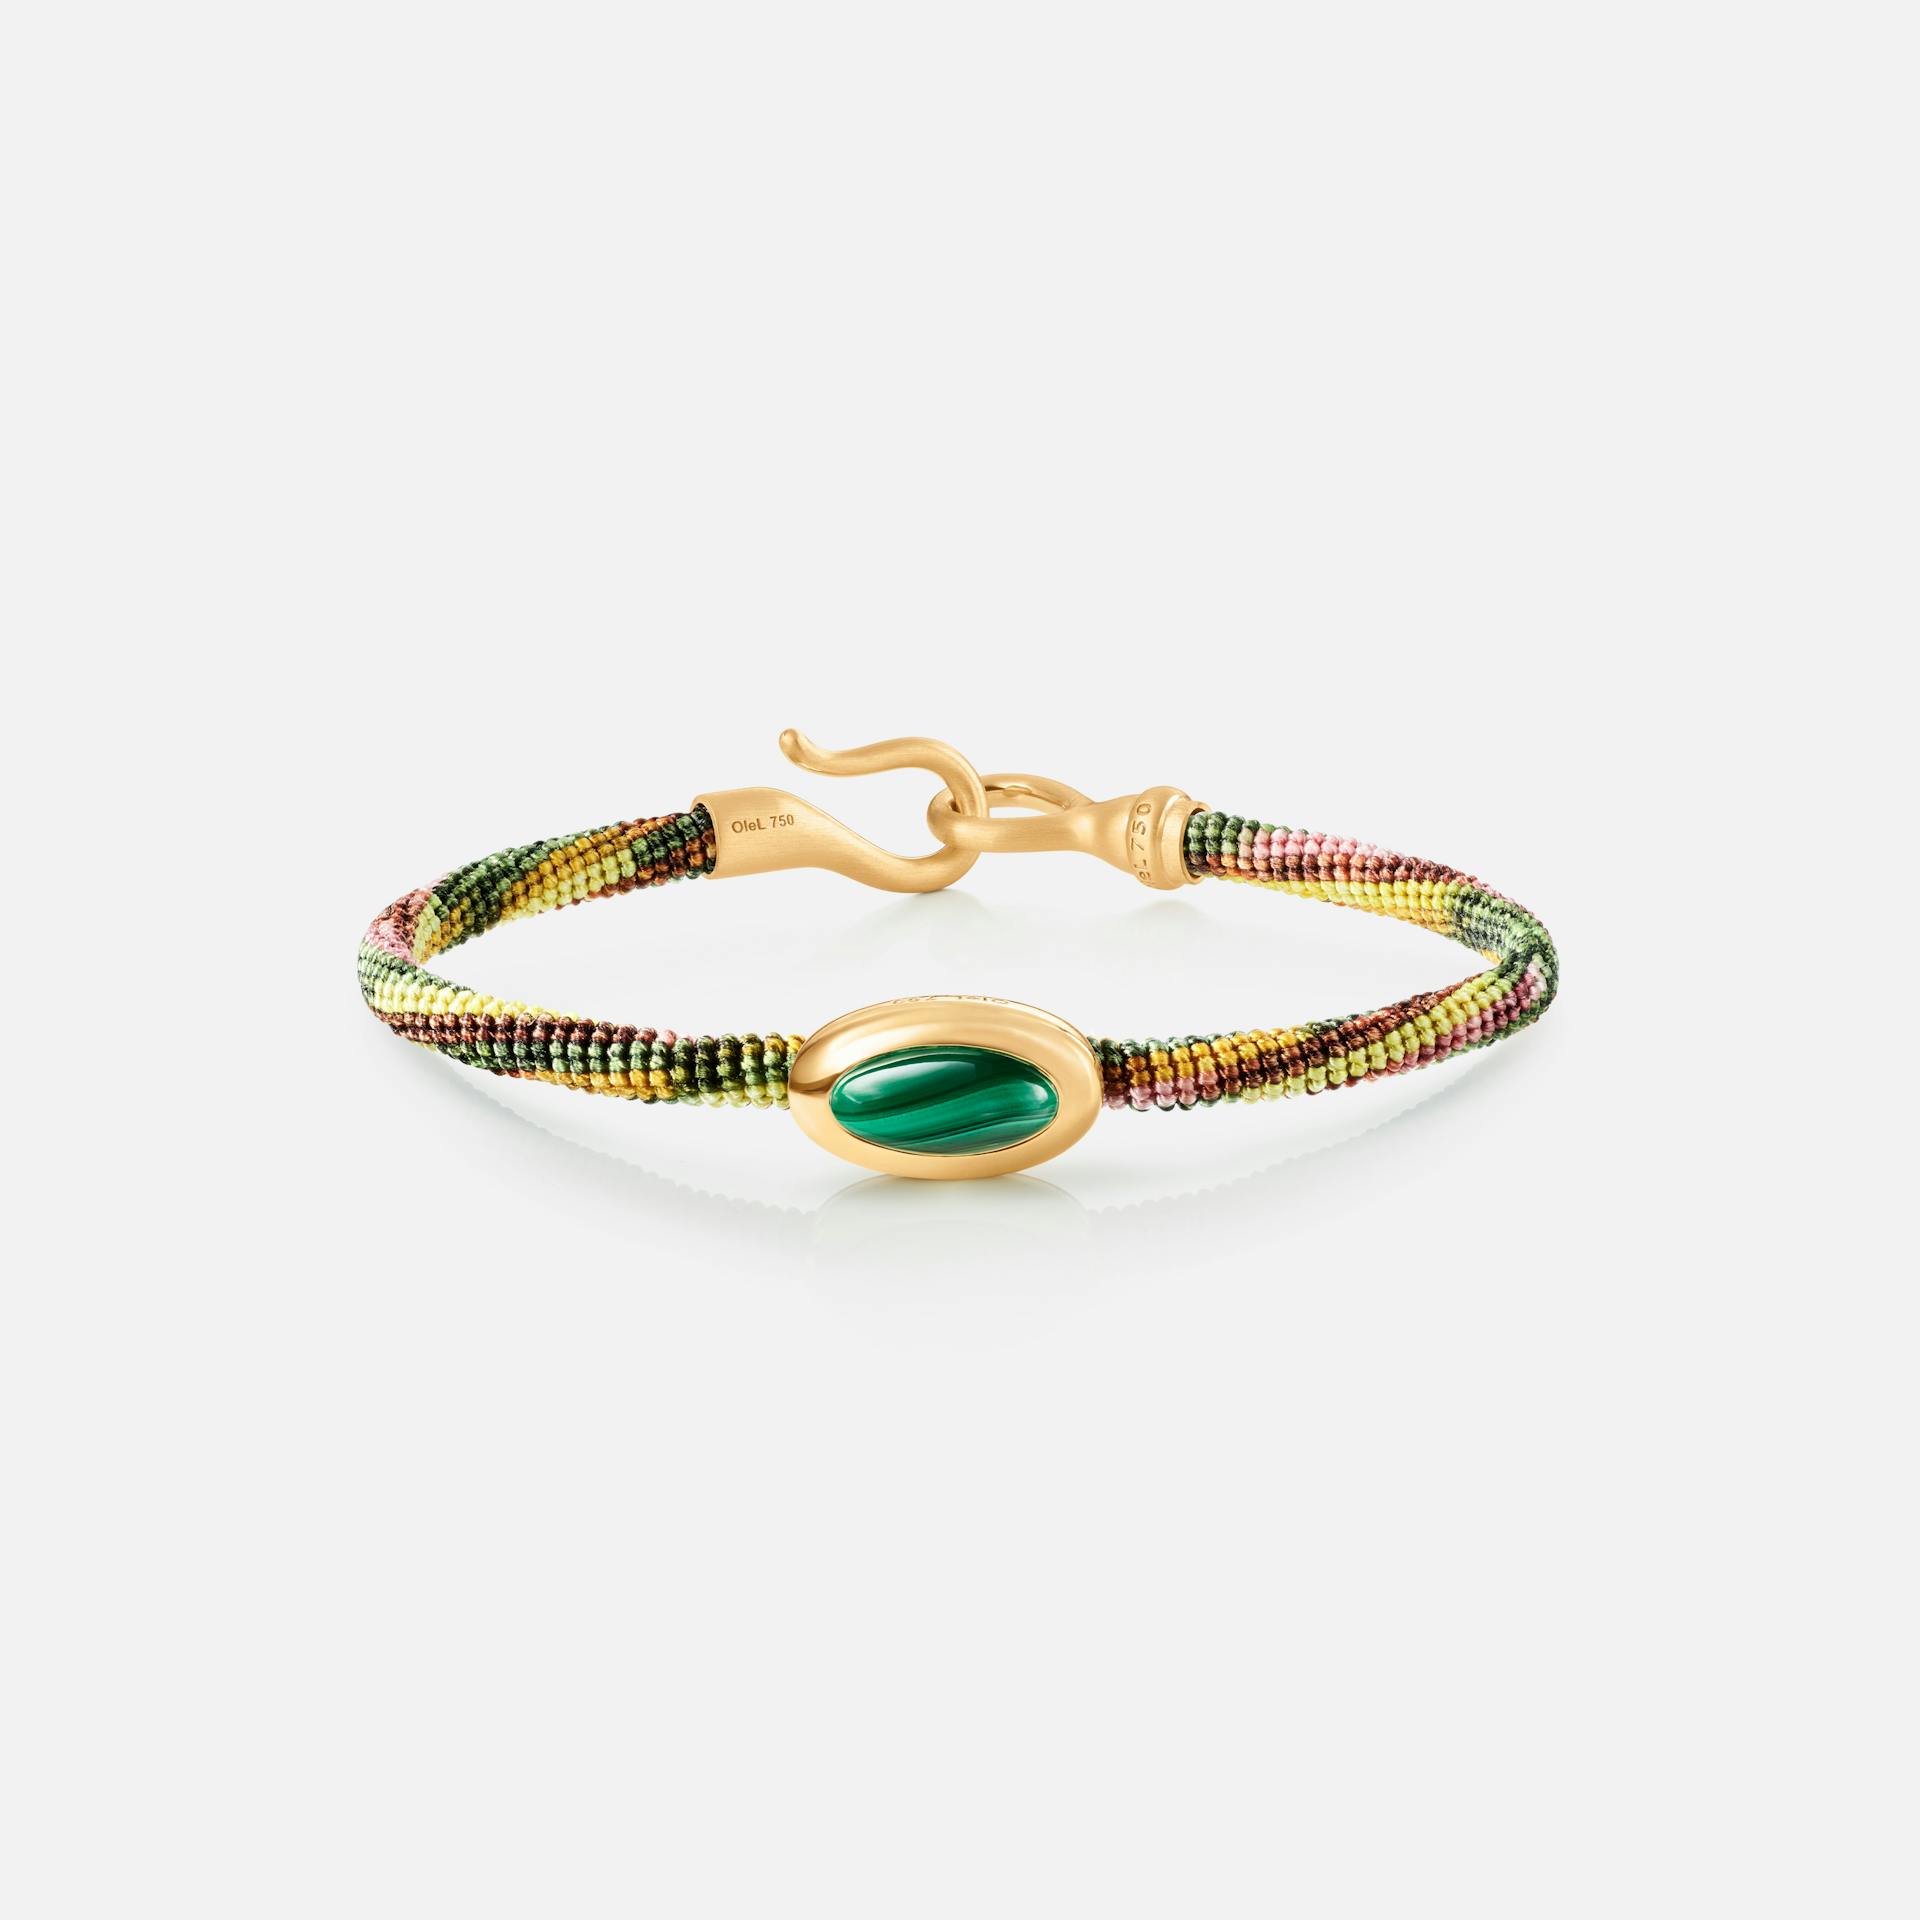 Life Bracelet with malachite 4,5 mm 18k gold and malachite with Plum rope